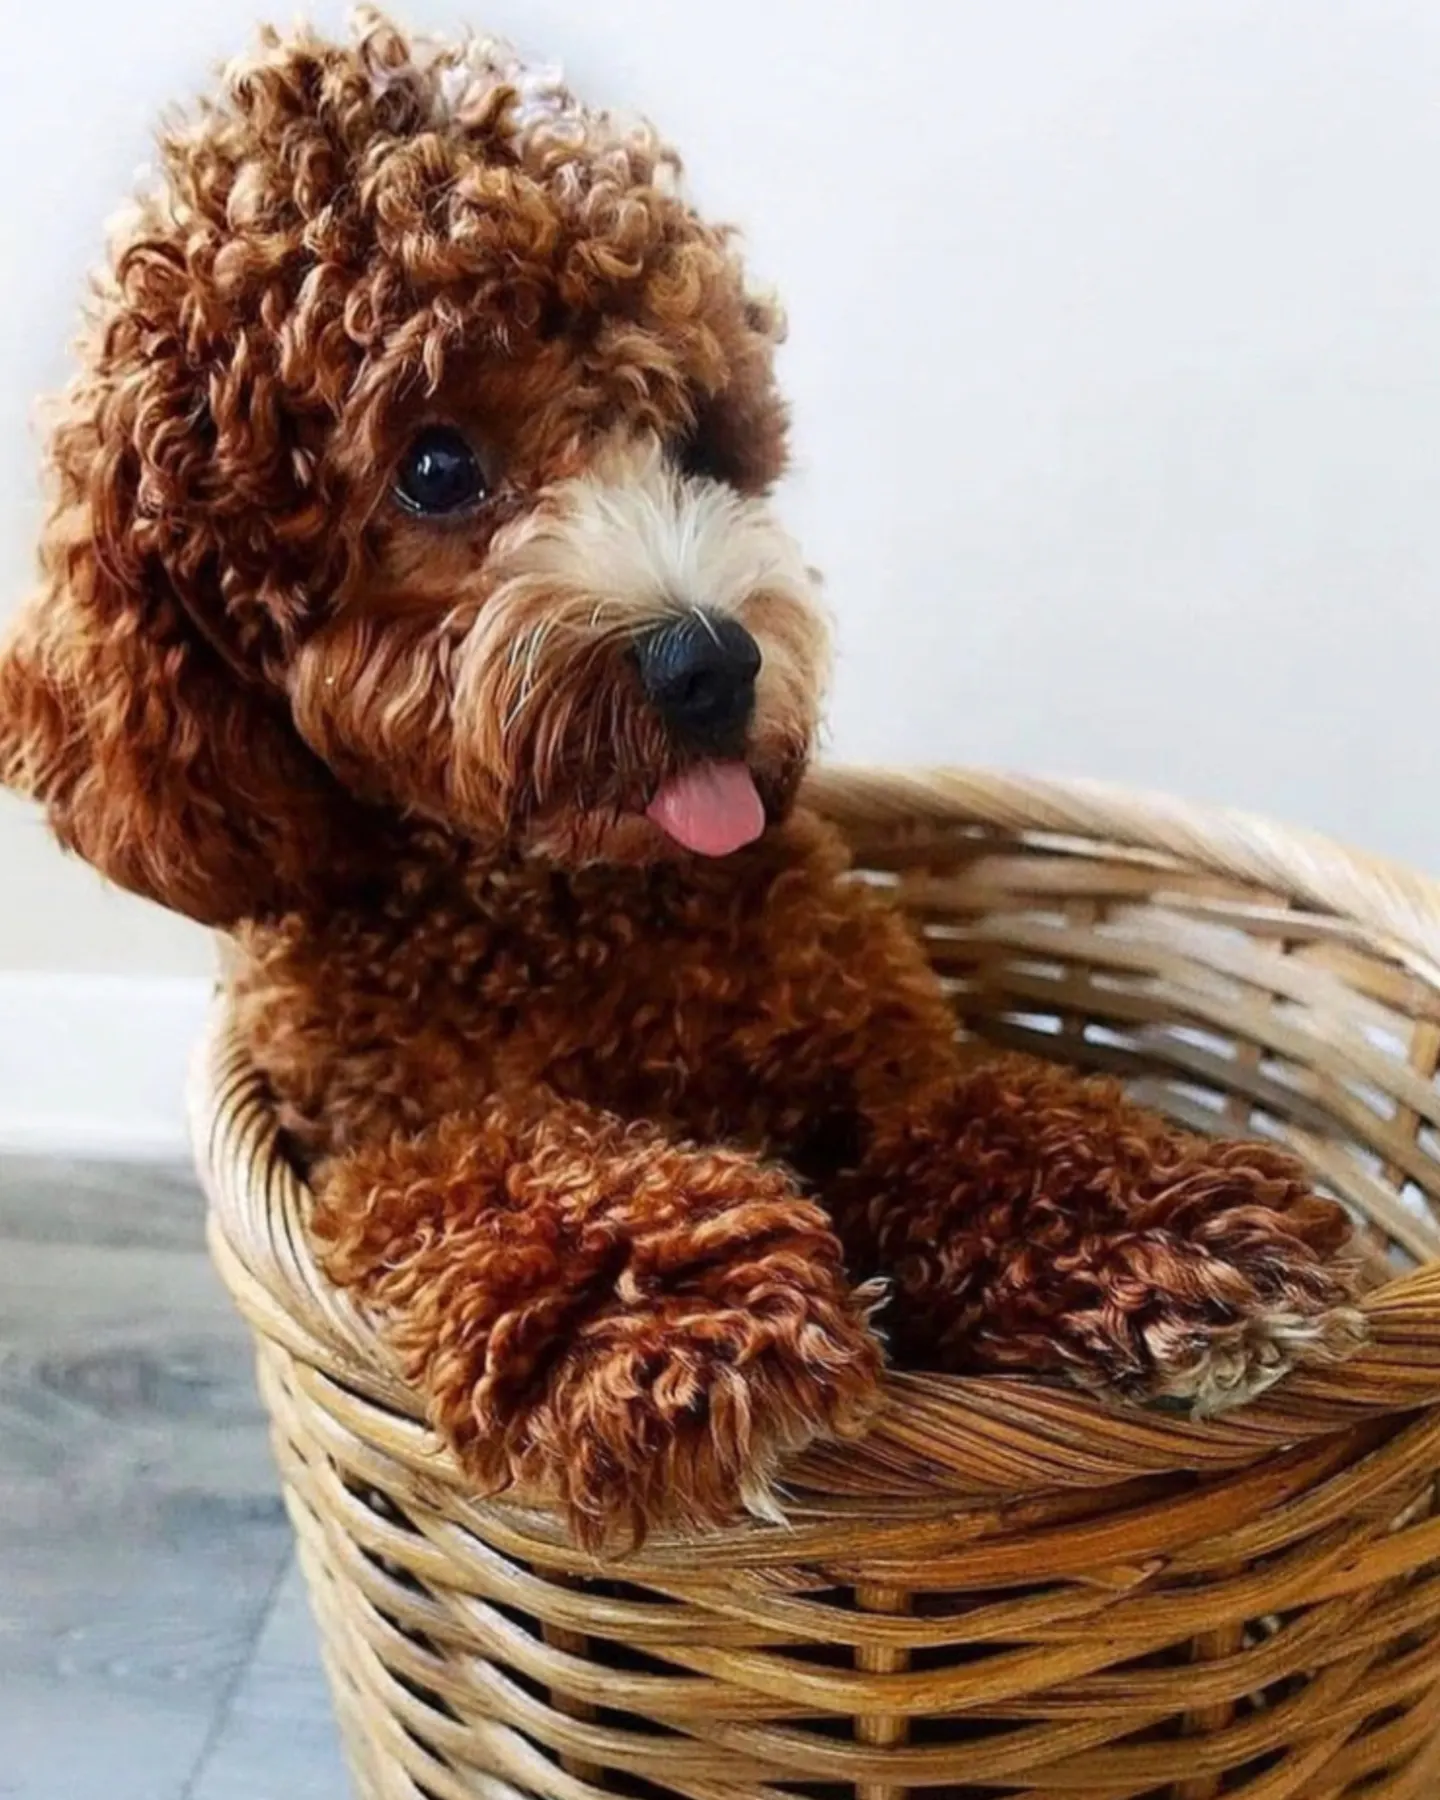 Poodle in basket sticking his tongue out